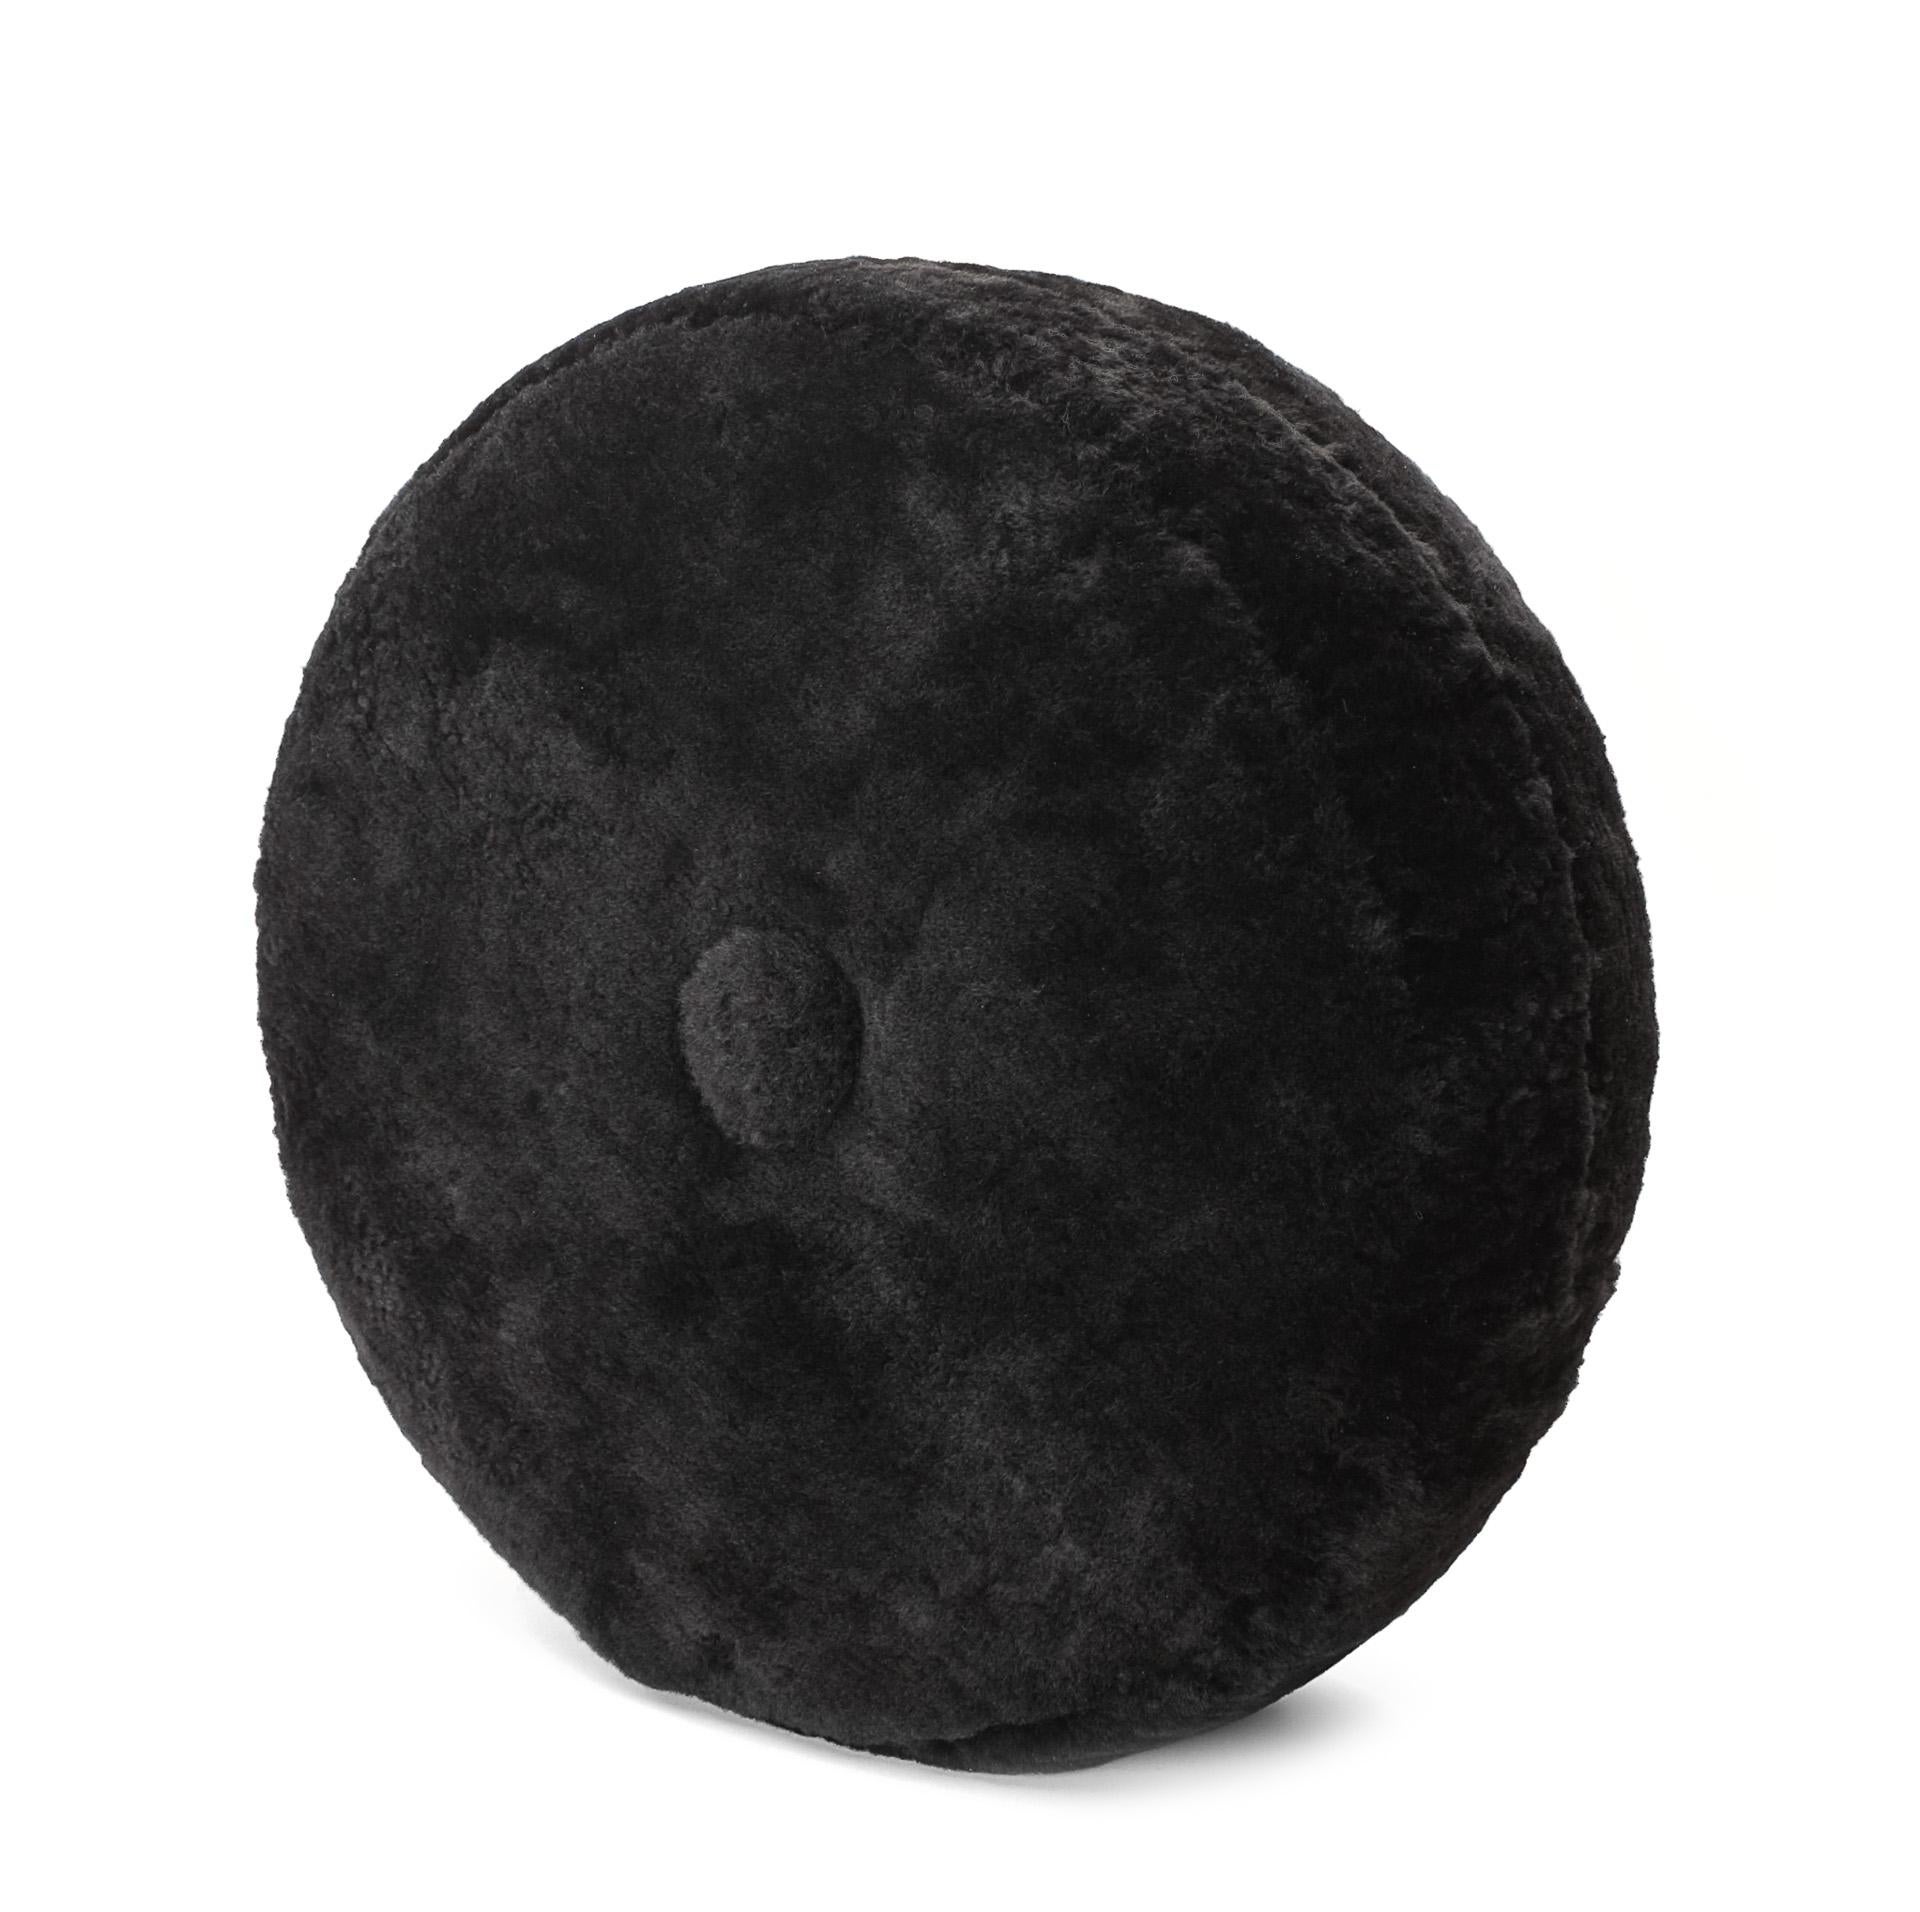 Designed to exude luxury and wake up your space with additional seating, accent decor and cozy chill zones, these low-profile circular shearling floor cushions can be easily moved or stashed away. 

Construction: Handcrafted to order in Long Island,